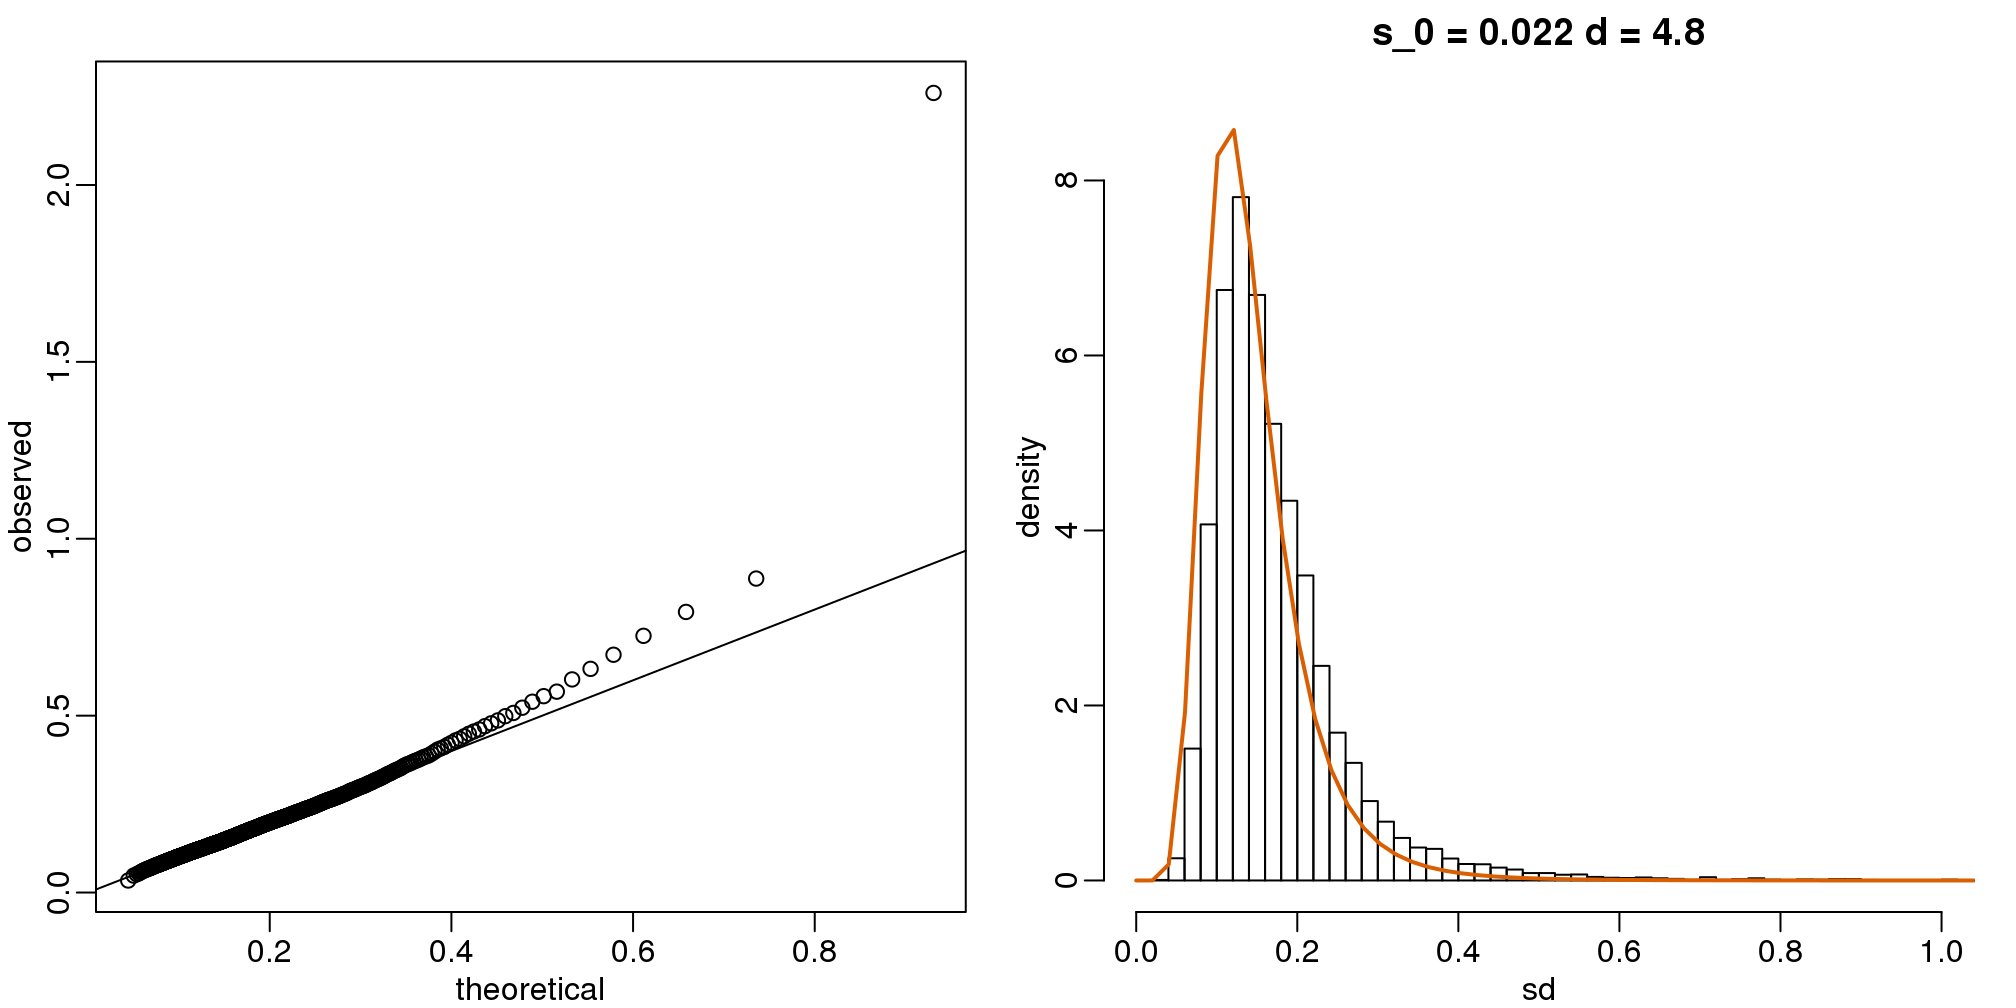 qq-plot (left) and density (right) demonstrate that model fits data well.